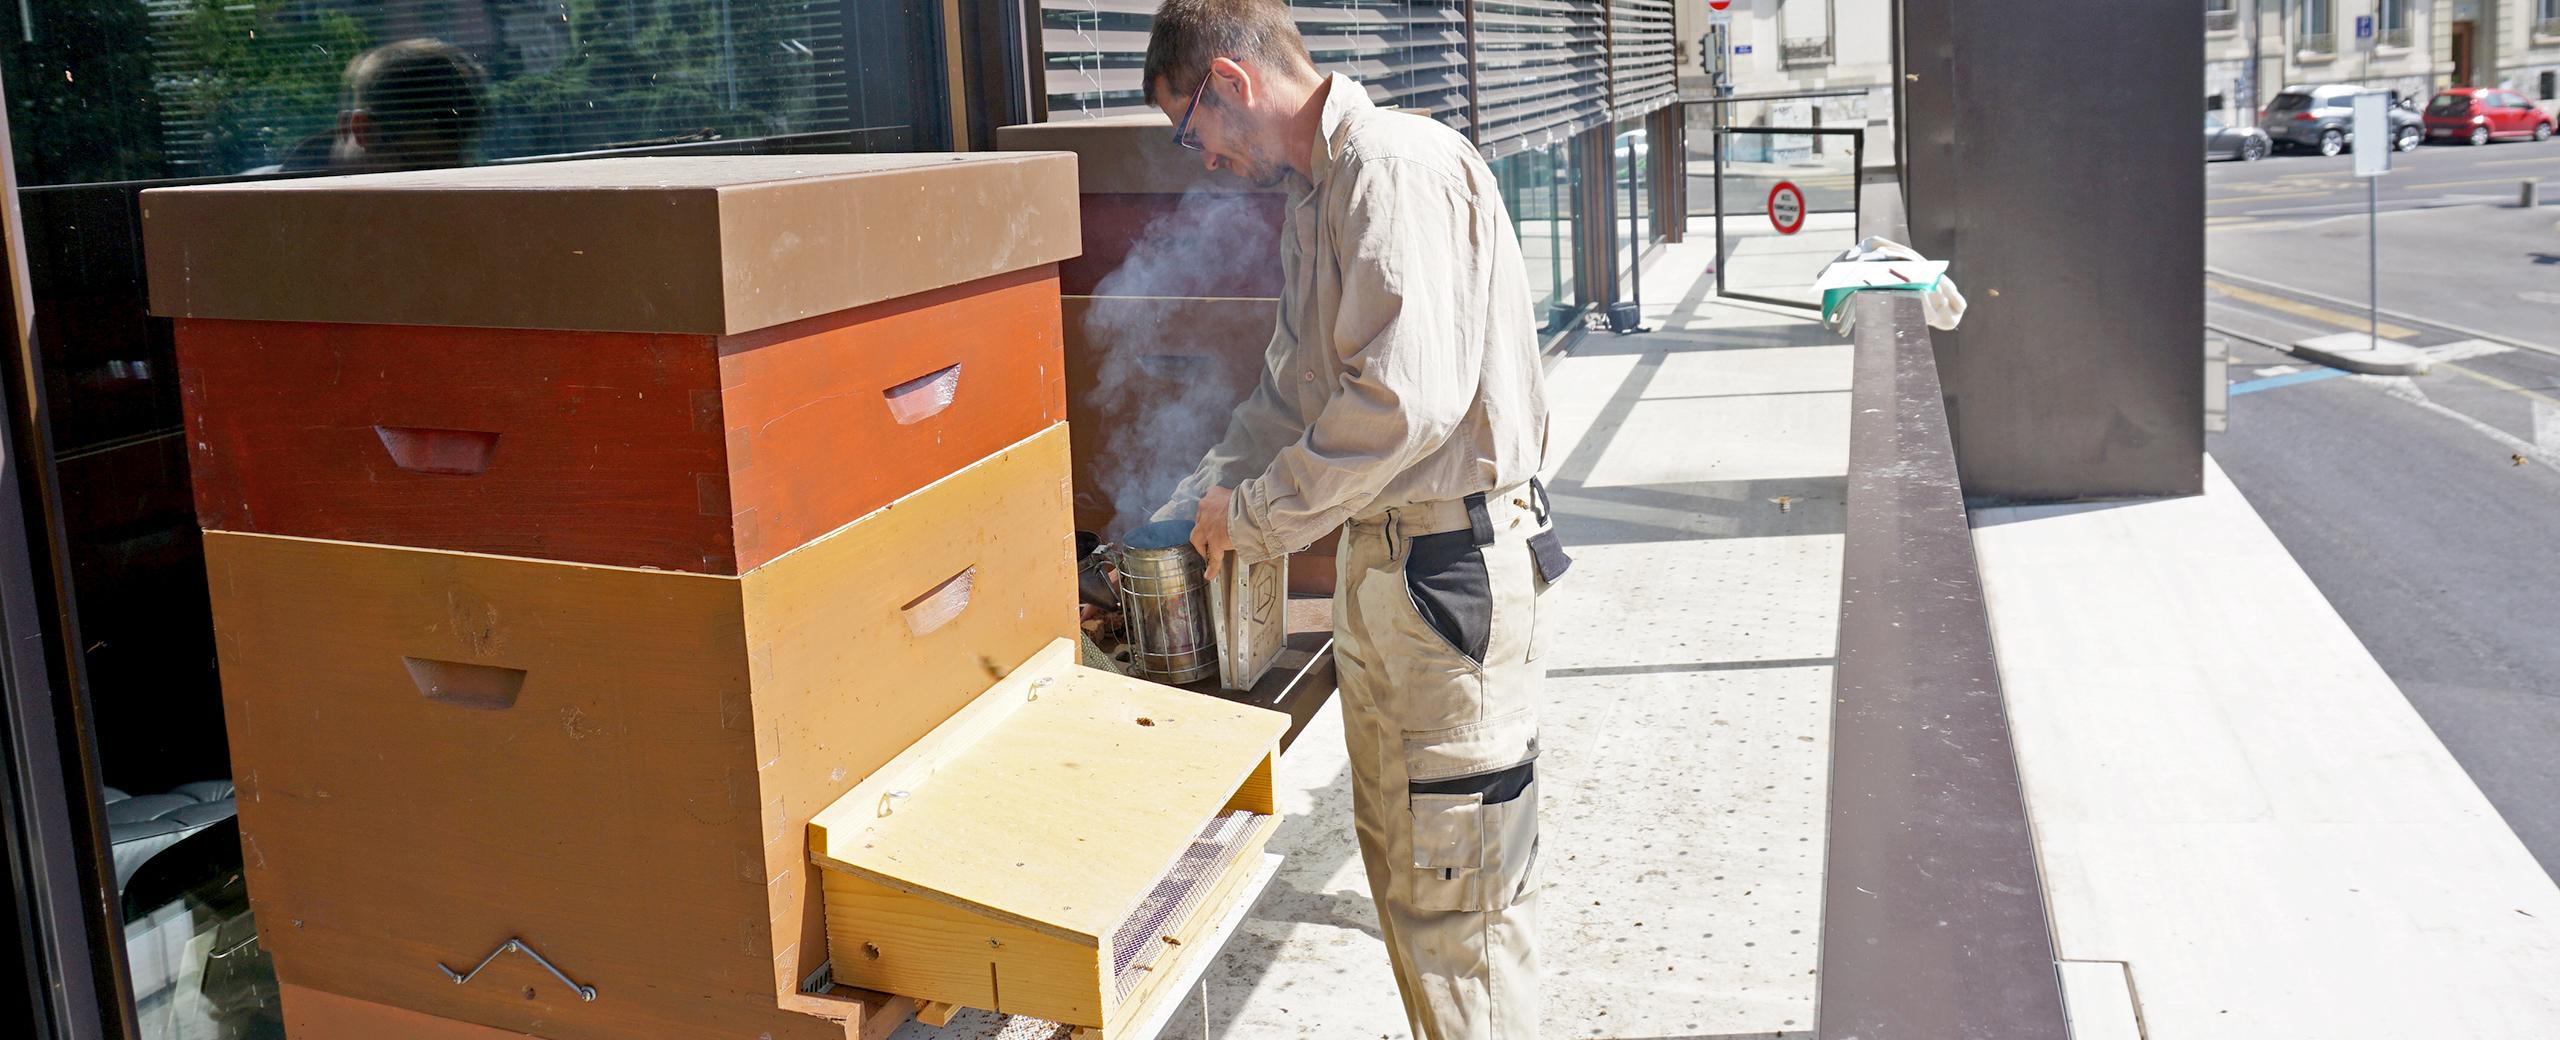 evaluation of the resources used by bees in the city